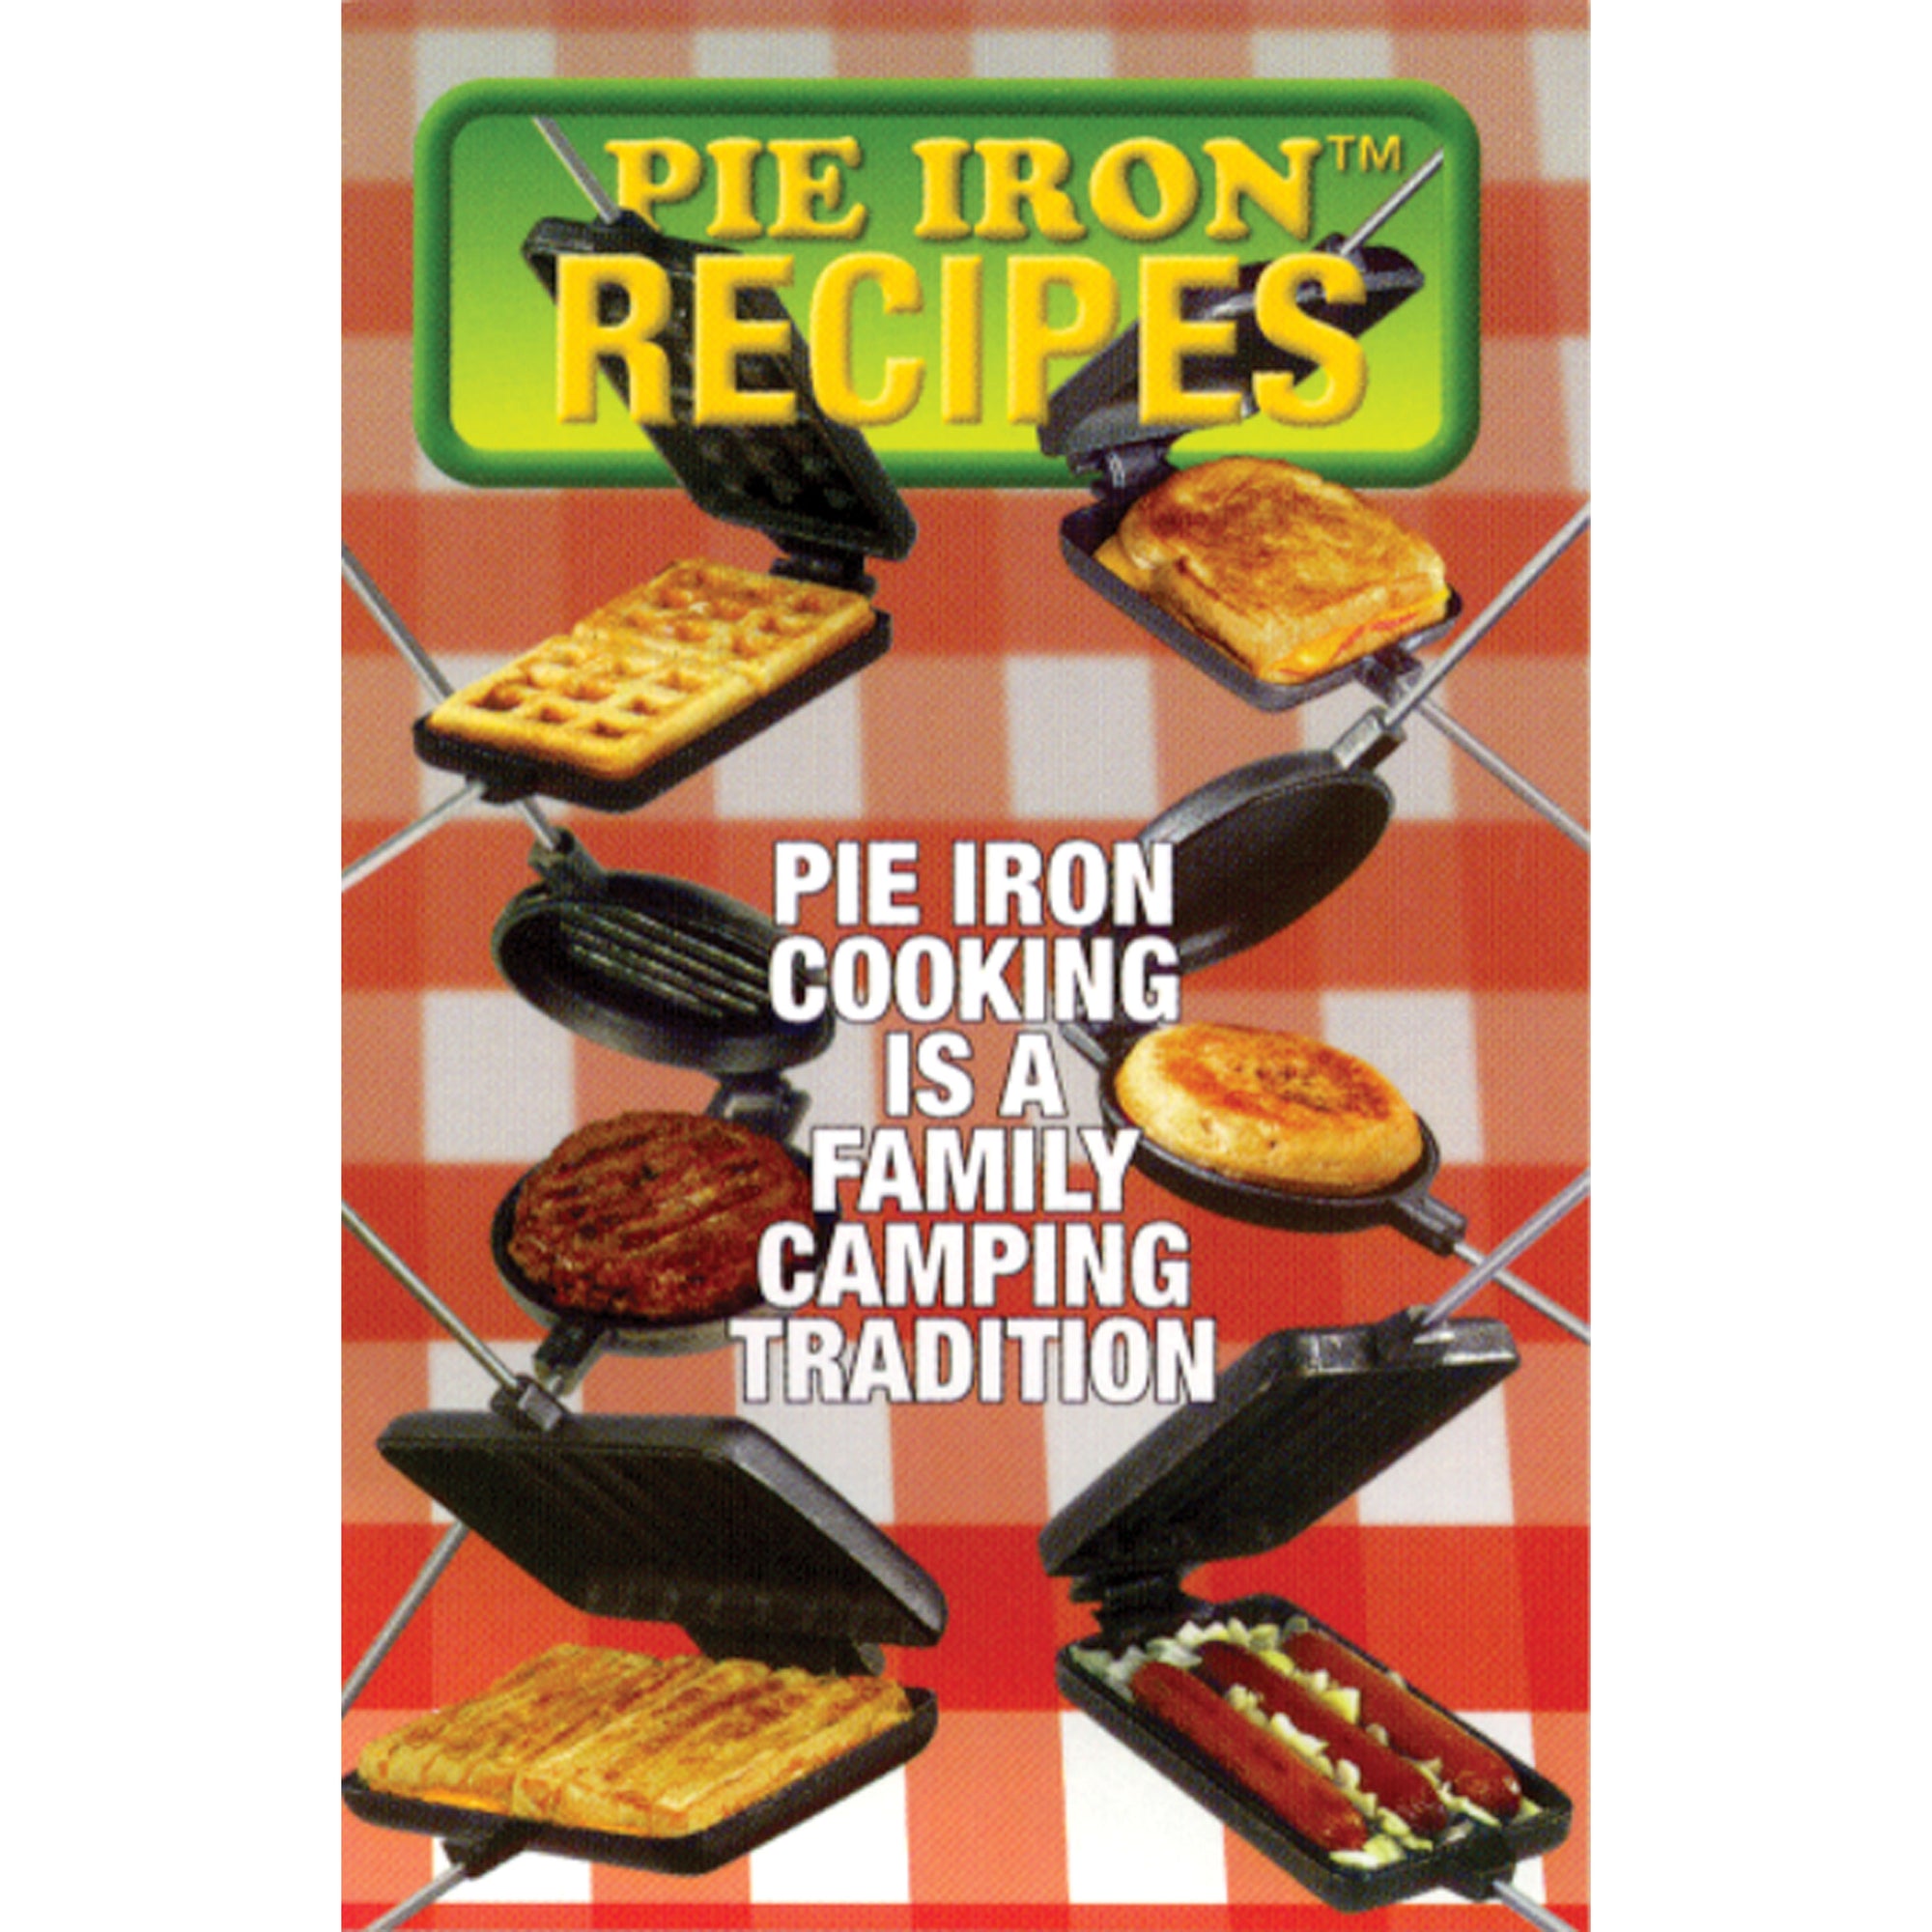 Rome Industries 2000 Pie Iron Recipes By Richard O'Russa